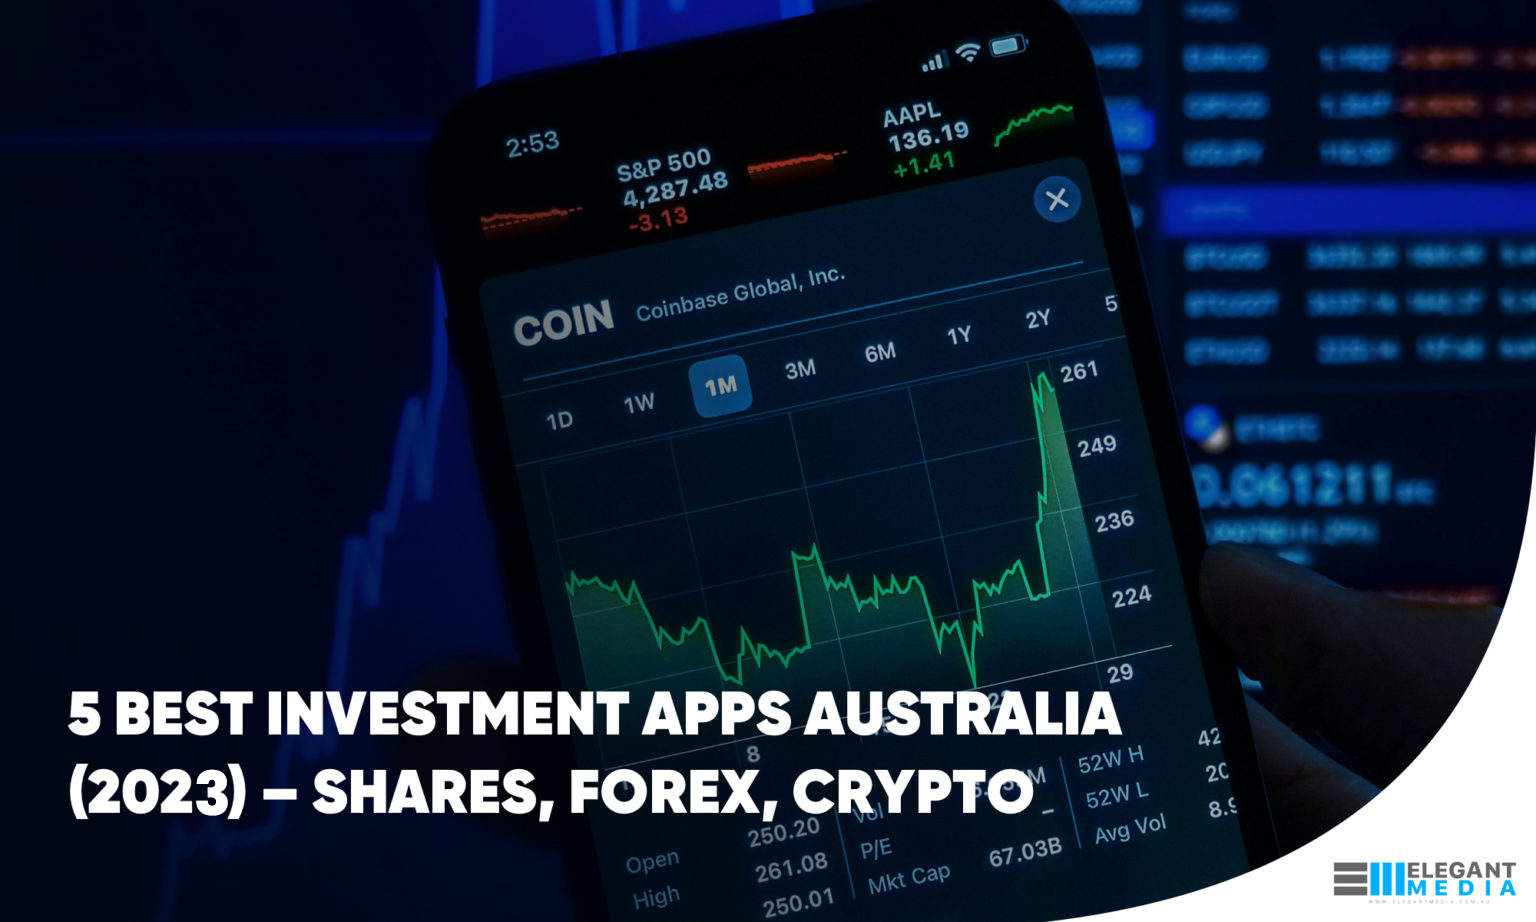 5 Best Investment Apps Australia – Shares, Forex, Crypto